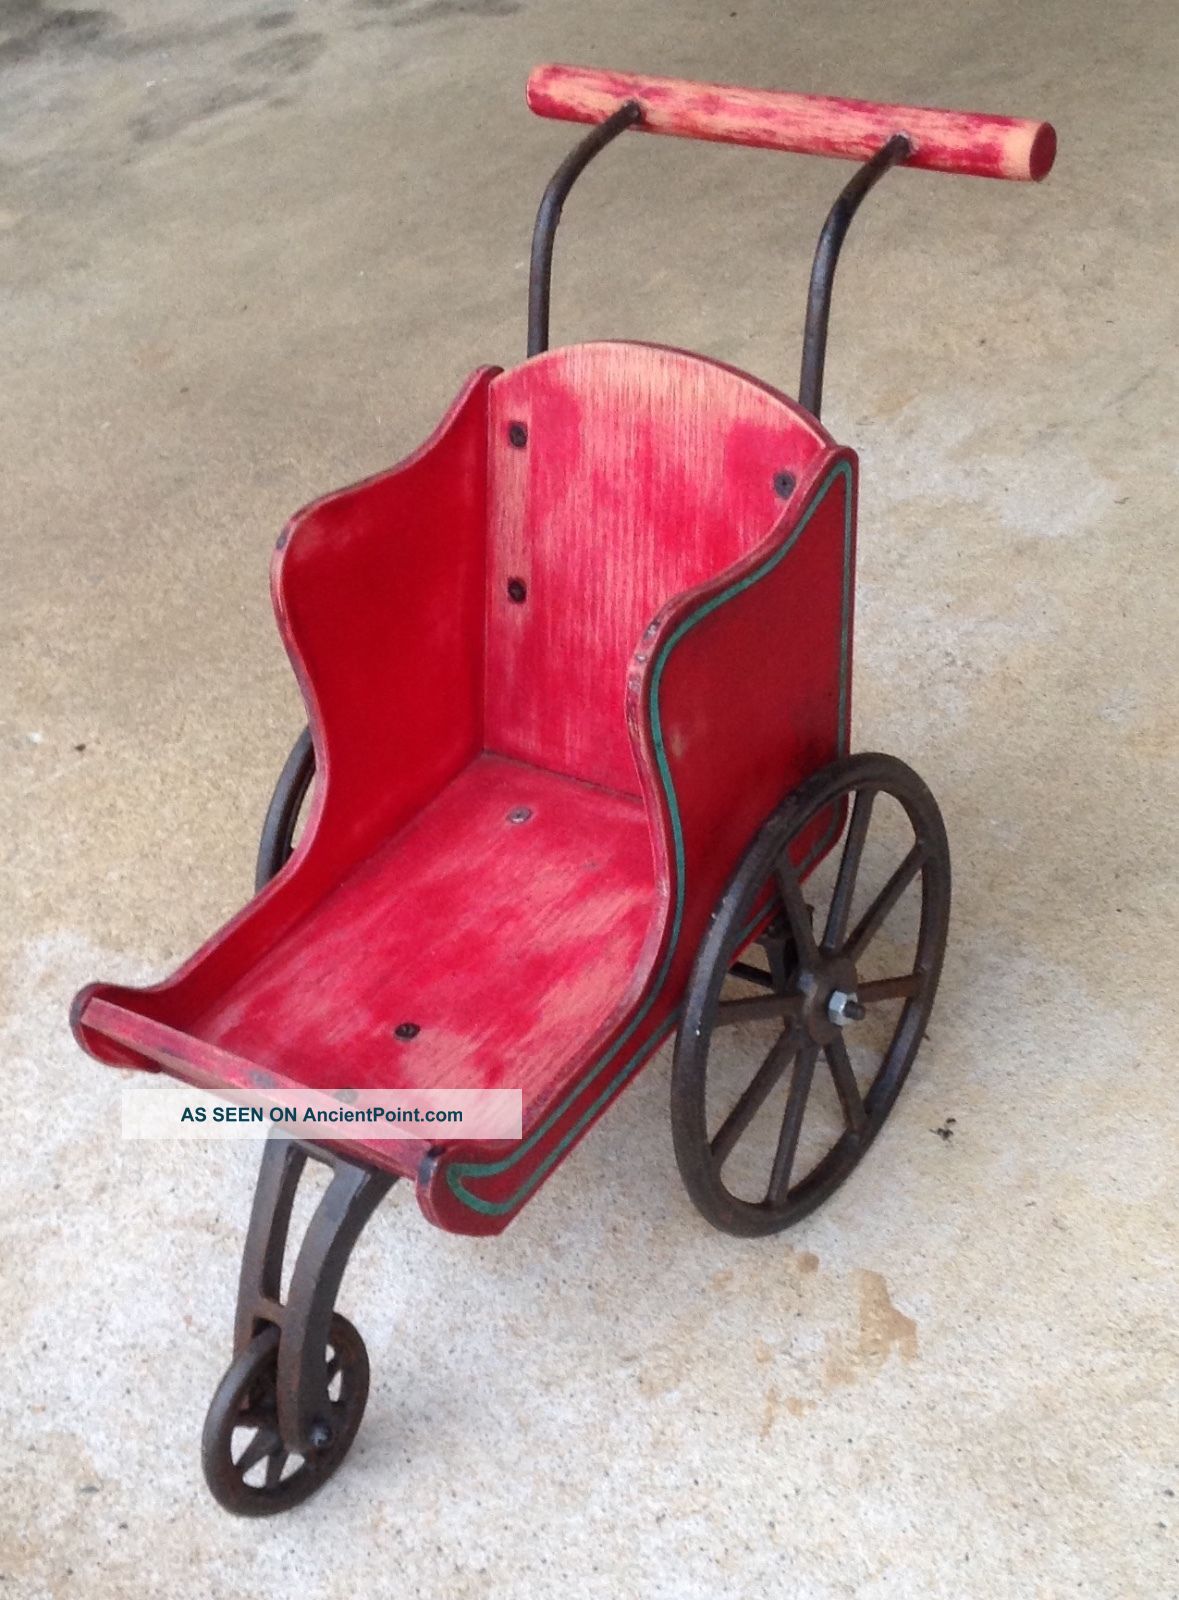 Vintage Santa Sleigh Carriage Buggy Stroller Toy Baby Doll Wood Cast Iron Wheels Baby Carriages & Buggies photo